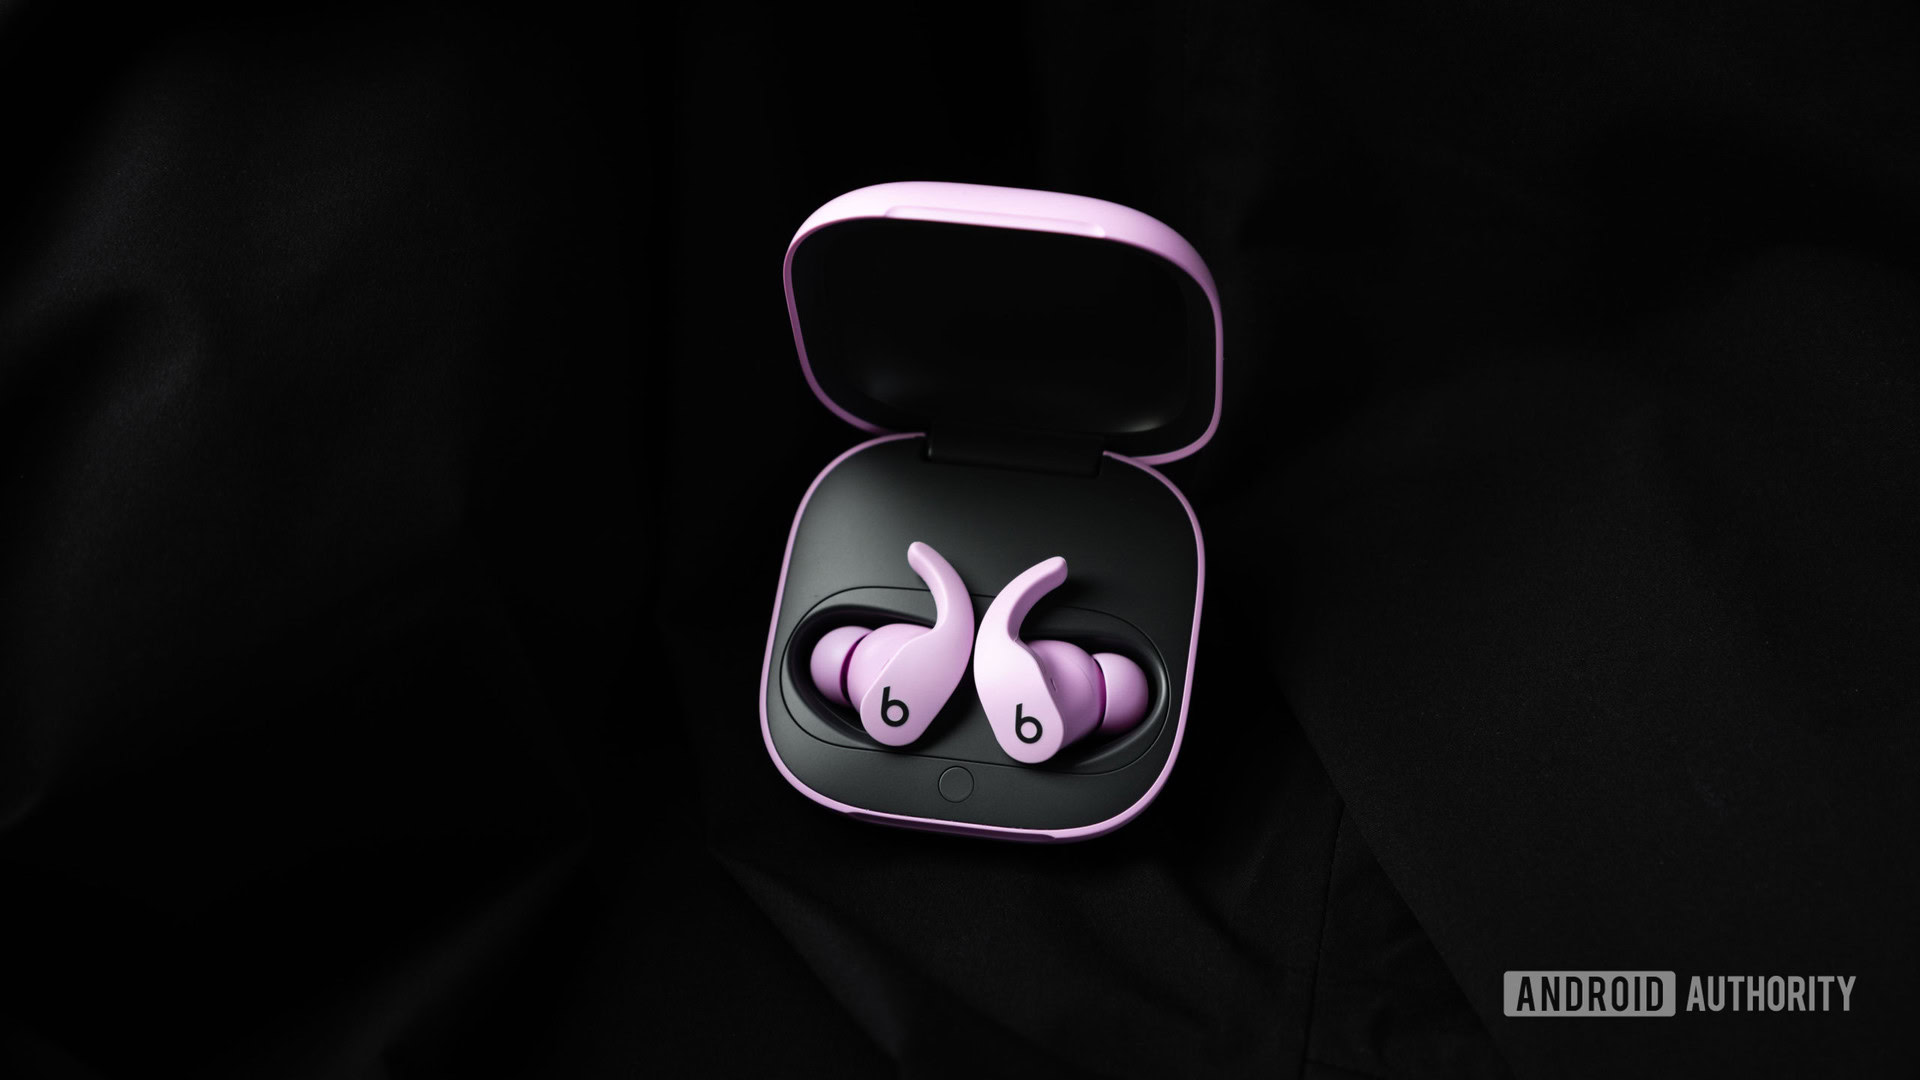 Beats Fit Pro noise canceling true wireless headphones in purple sit in the open charging case on a black cloth background.